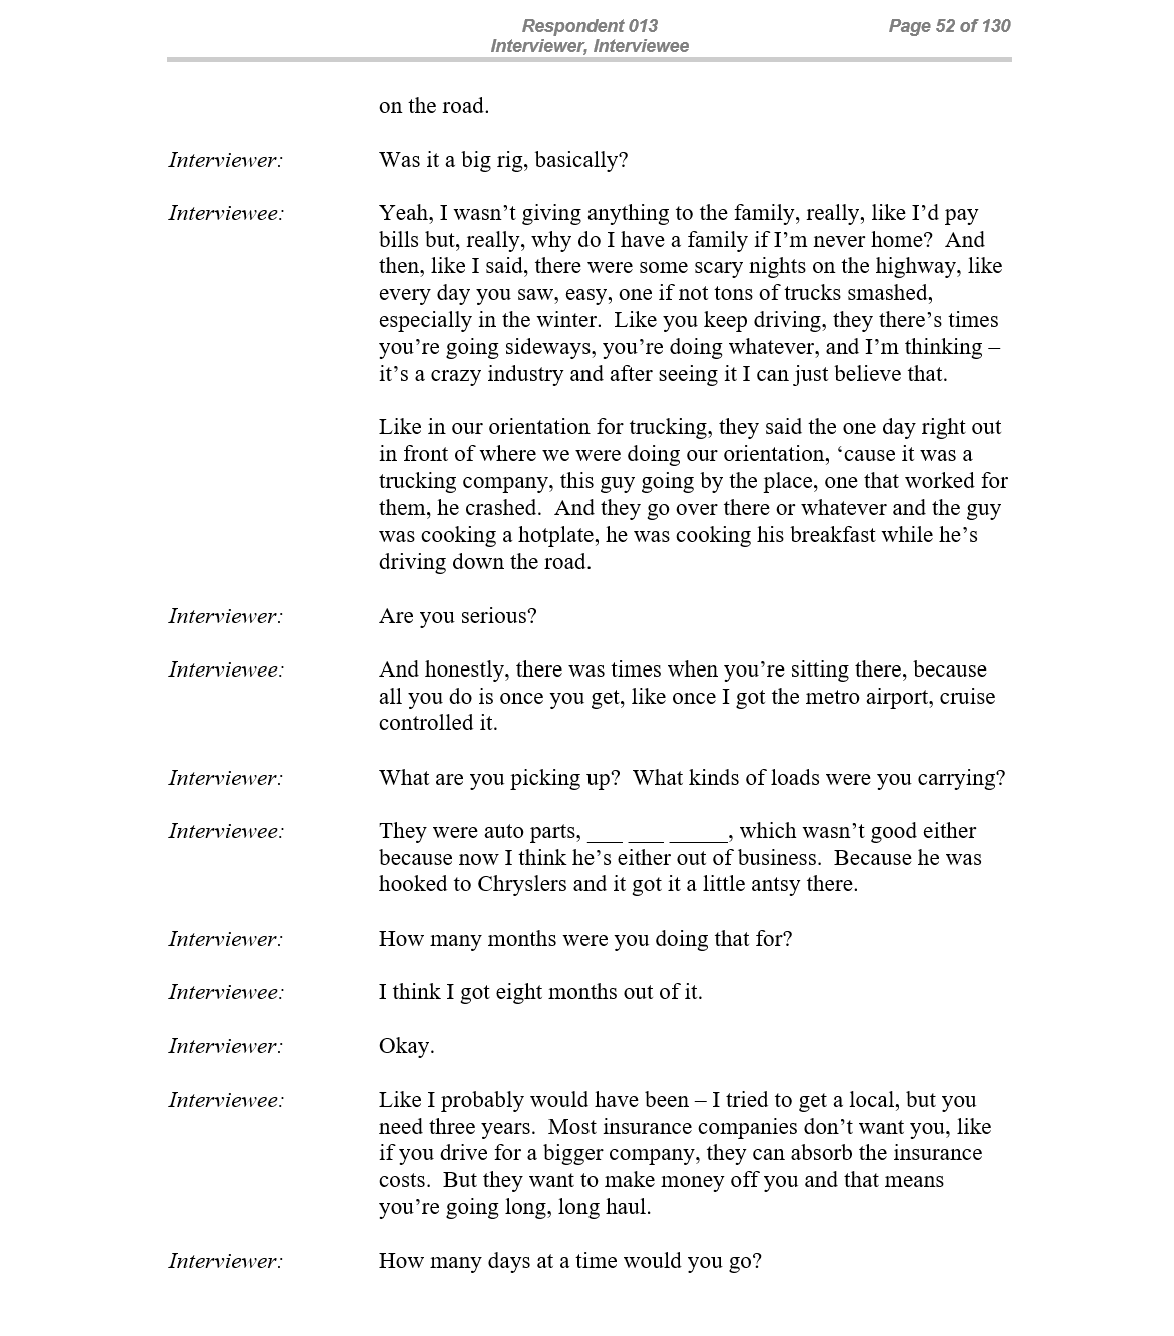 Page from interview transcript.